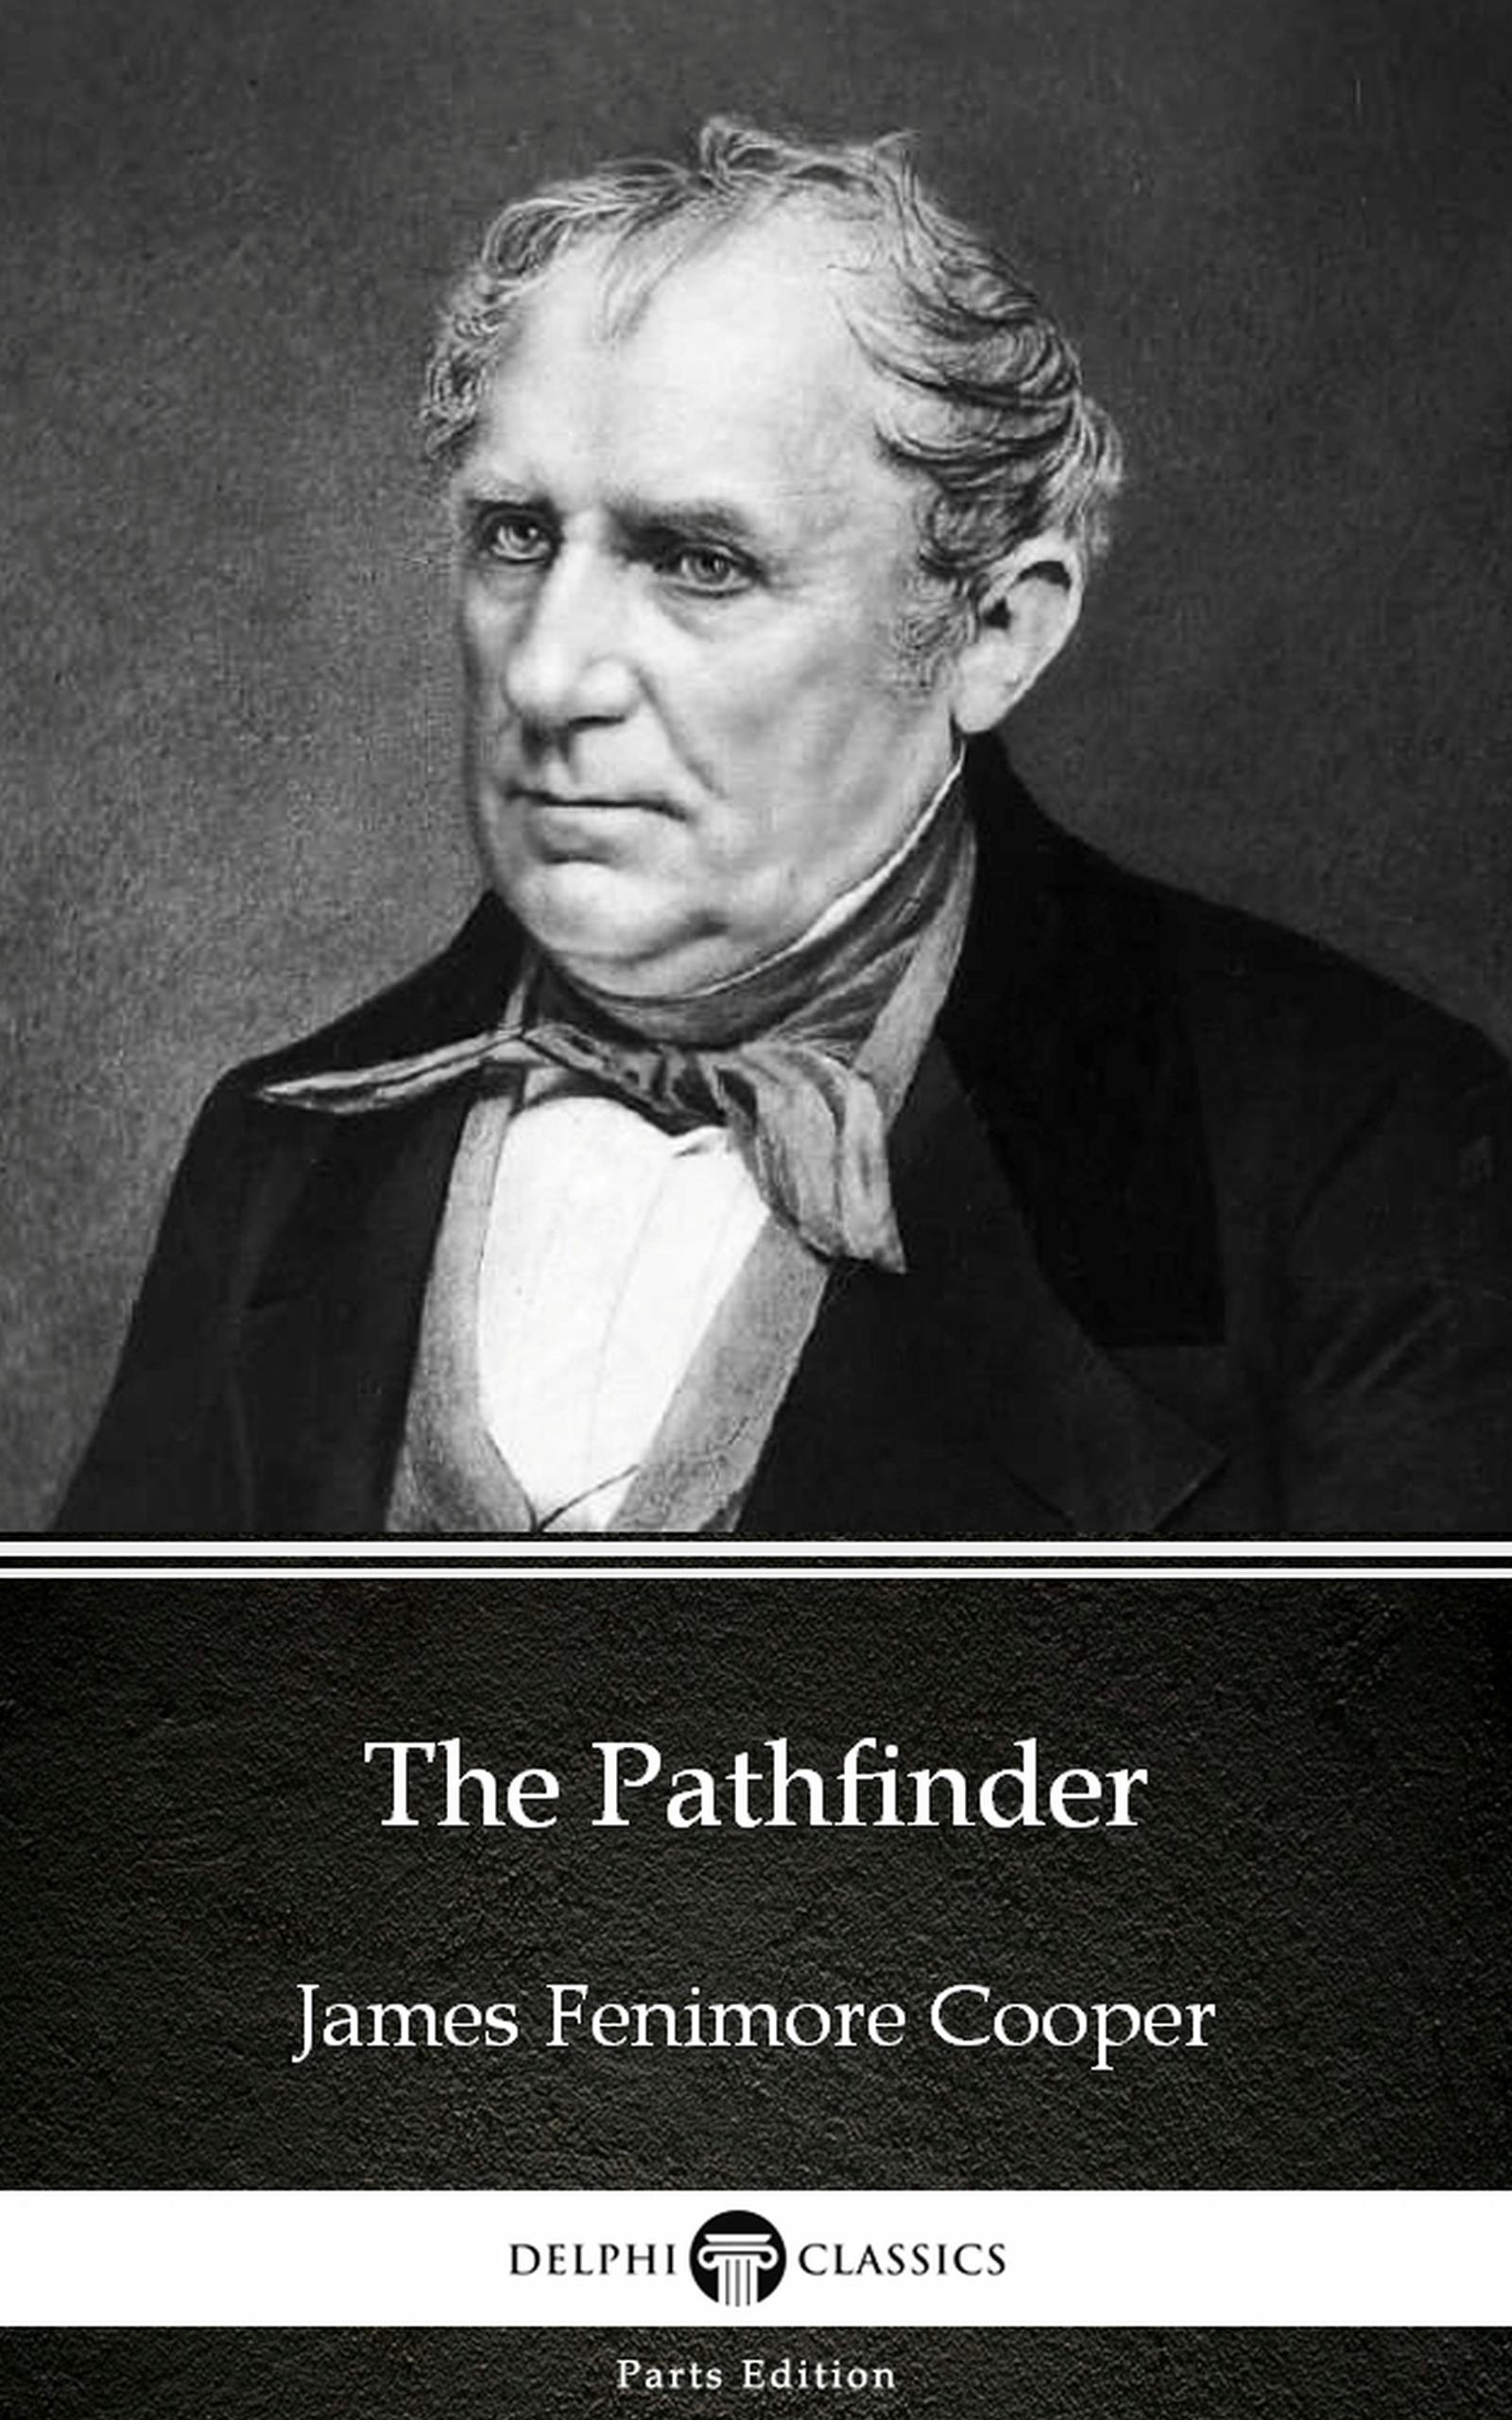 The Pathfinder by James Fenimore Cooper - Delphi Classics (Illustrated) - James Fenimore Cooper